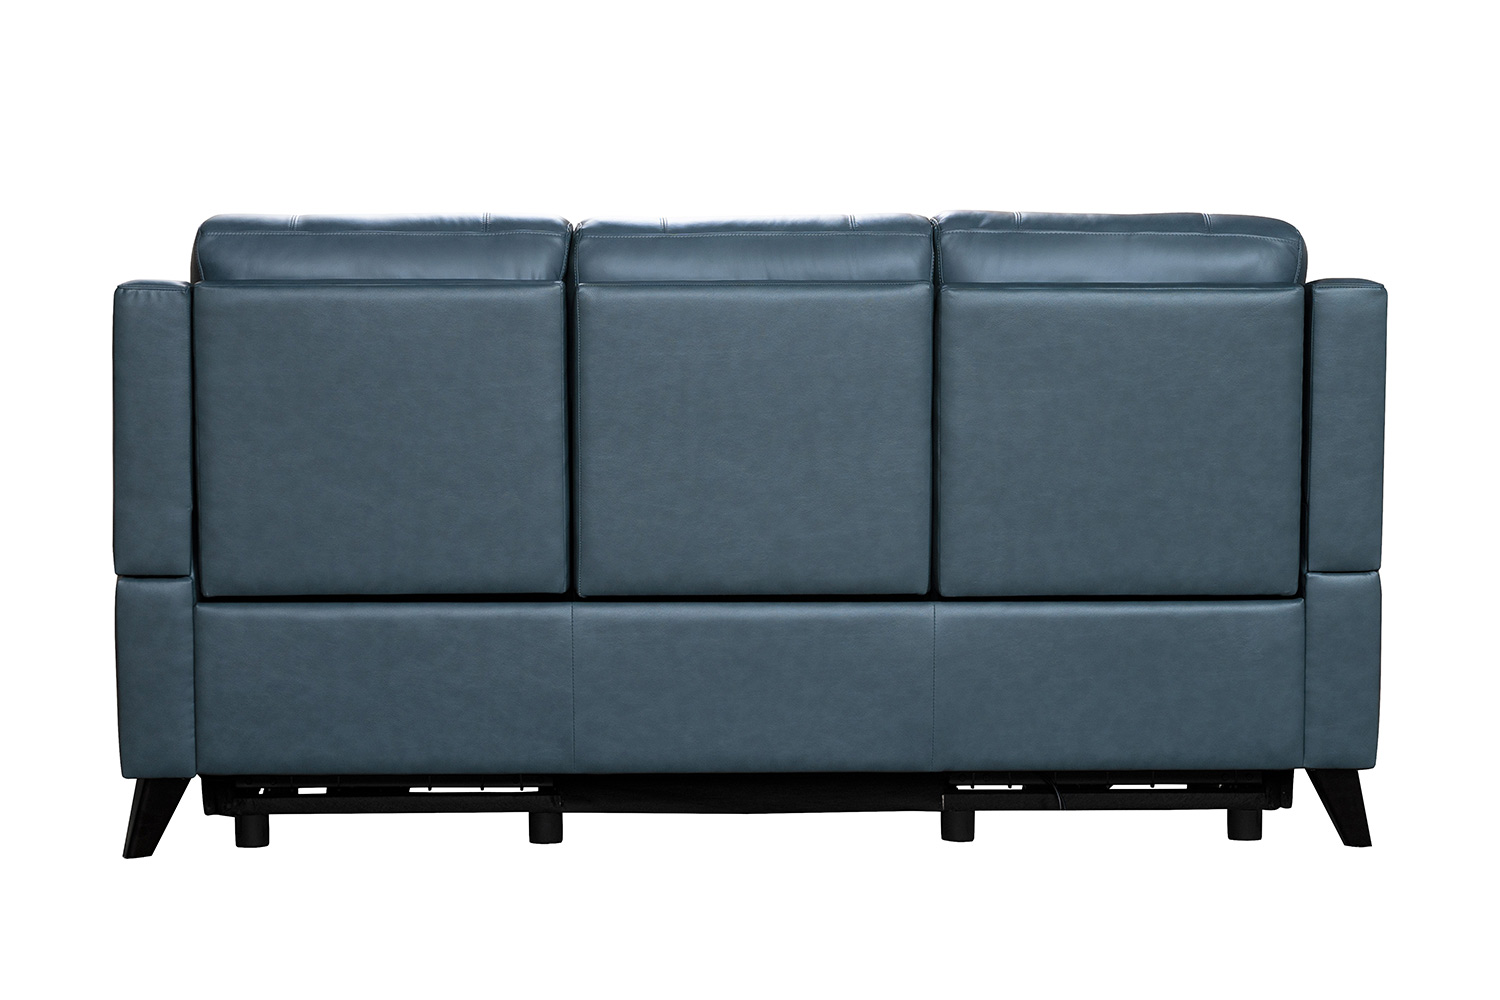 Barcalounger Kester Power Reclining Sofa with Power Head Rests - Masen Bluegray/Leather match